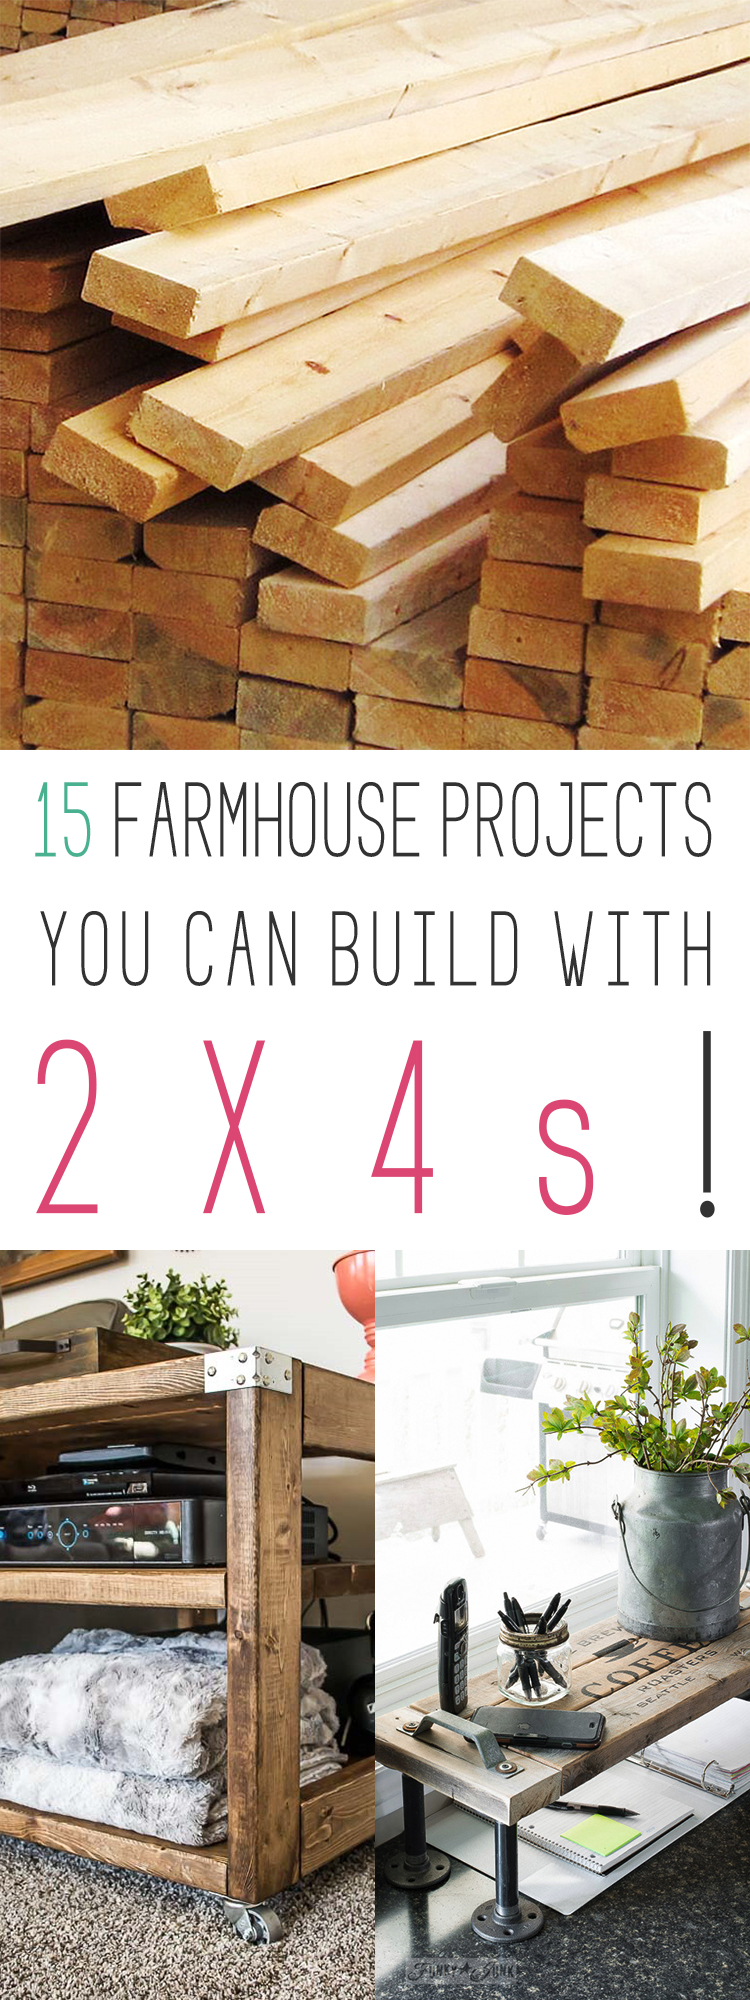 Beautiful Budget Friendly Farmhouse Projects You Can Build With 2X4s - The Cottage Market